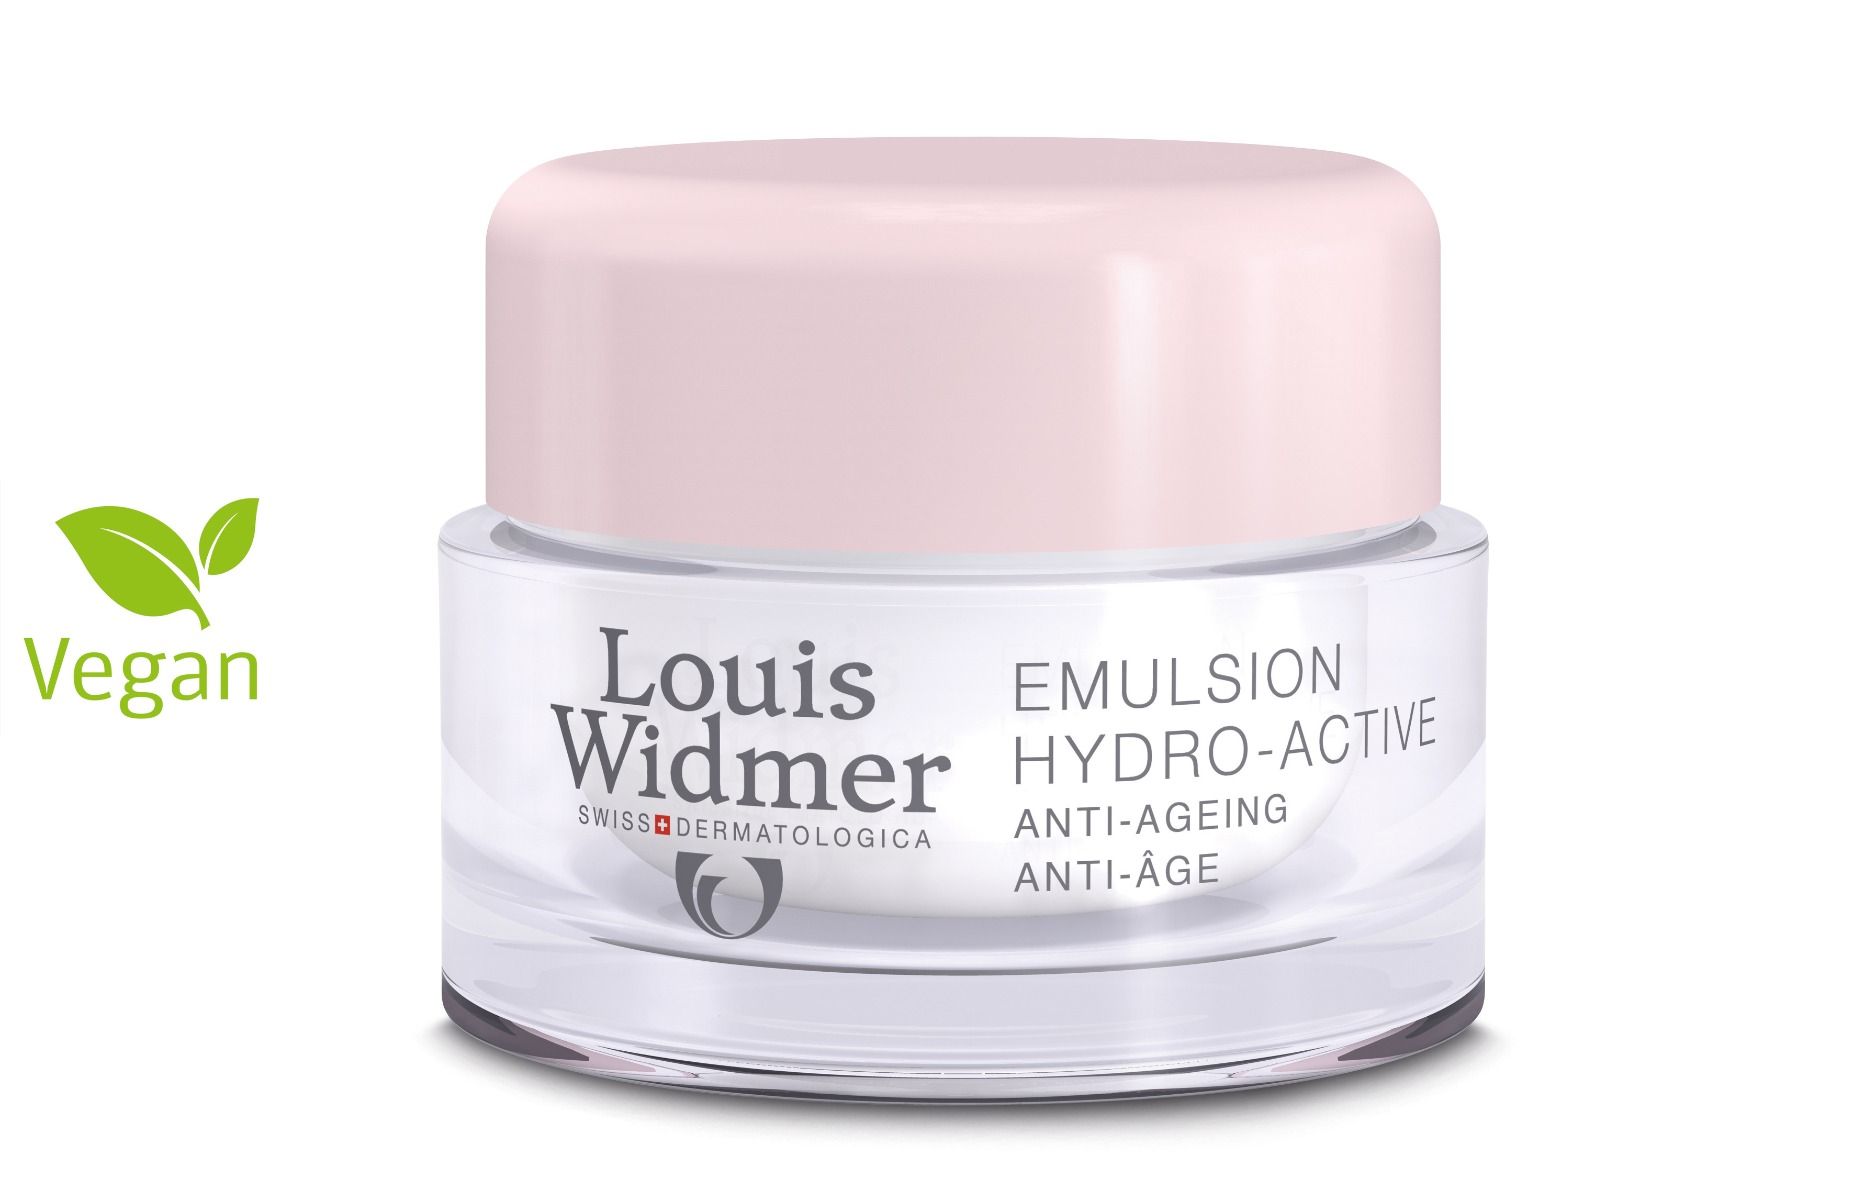 LOUISE WIDMER Tagesemulsion Hydro-Active Ohne Parfum